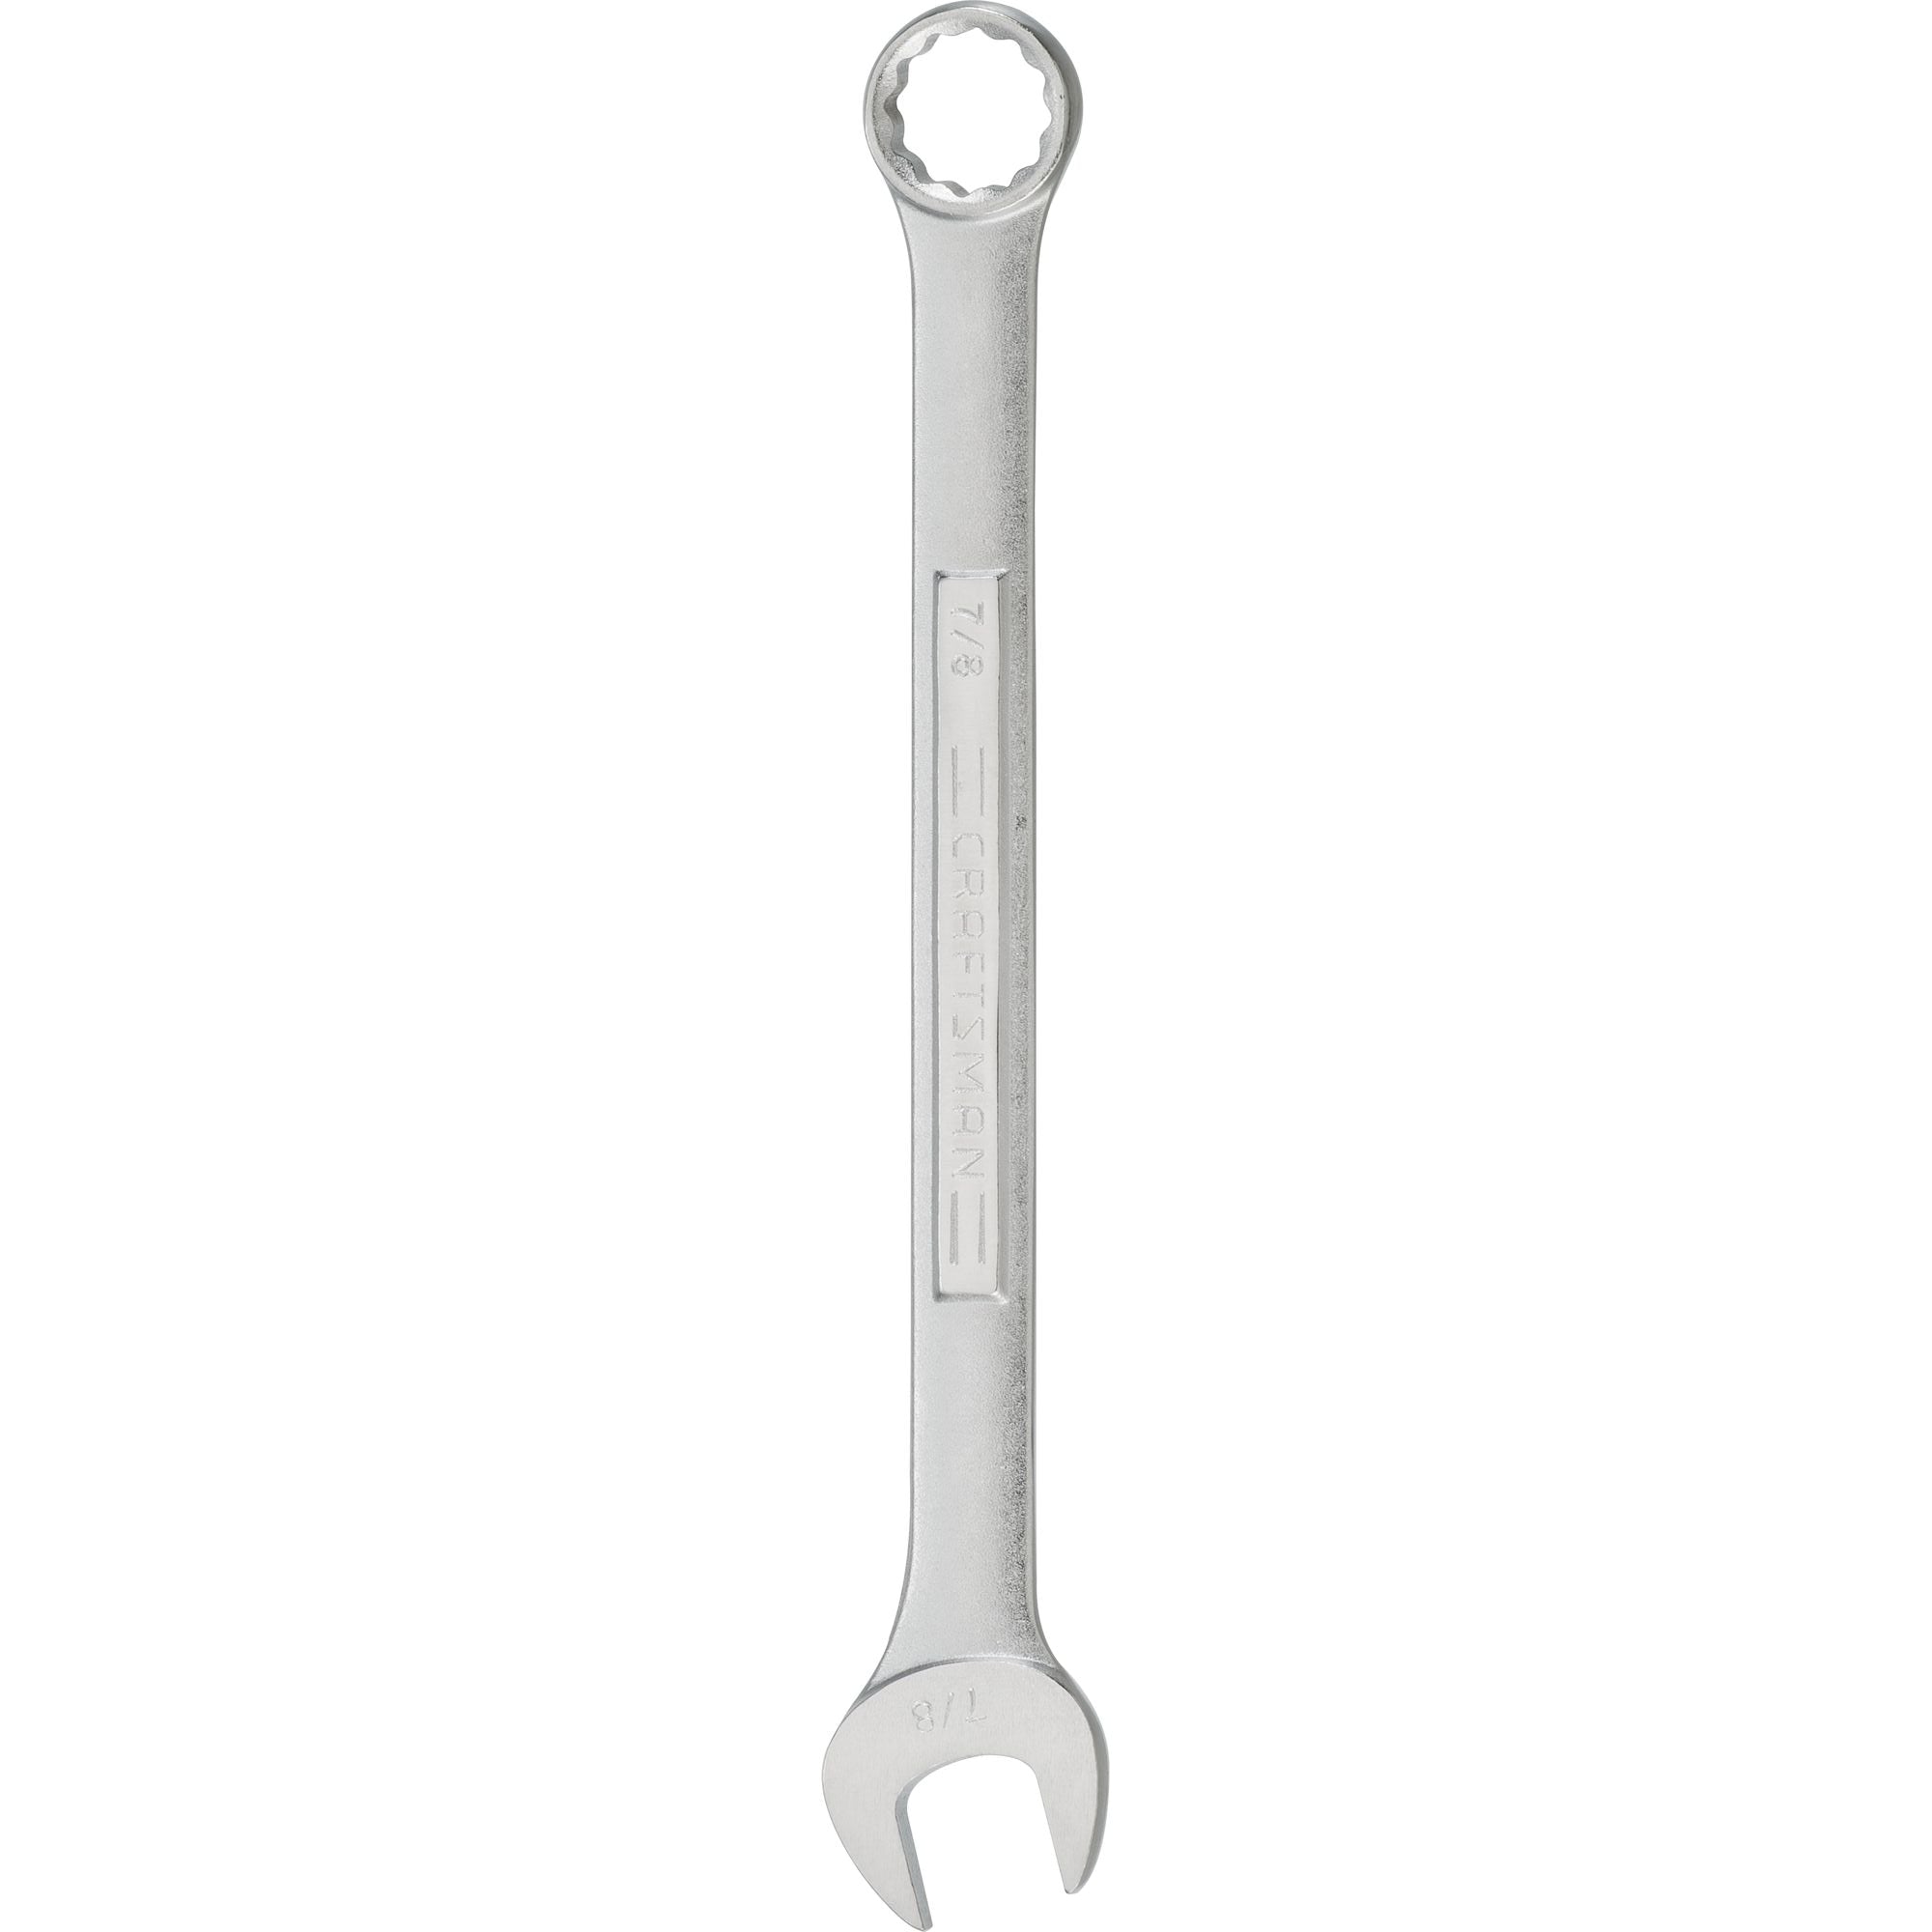 7/8-in Standard SAE Combination Wrench | CRAFTSMAN